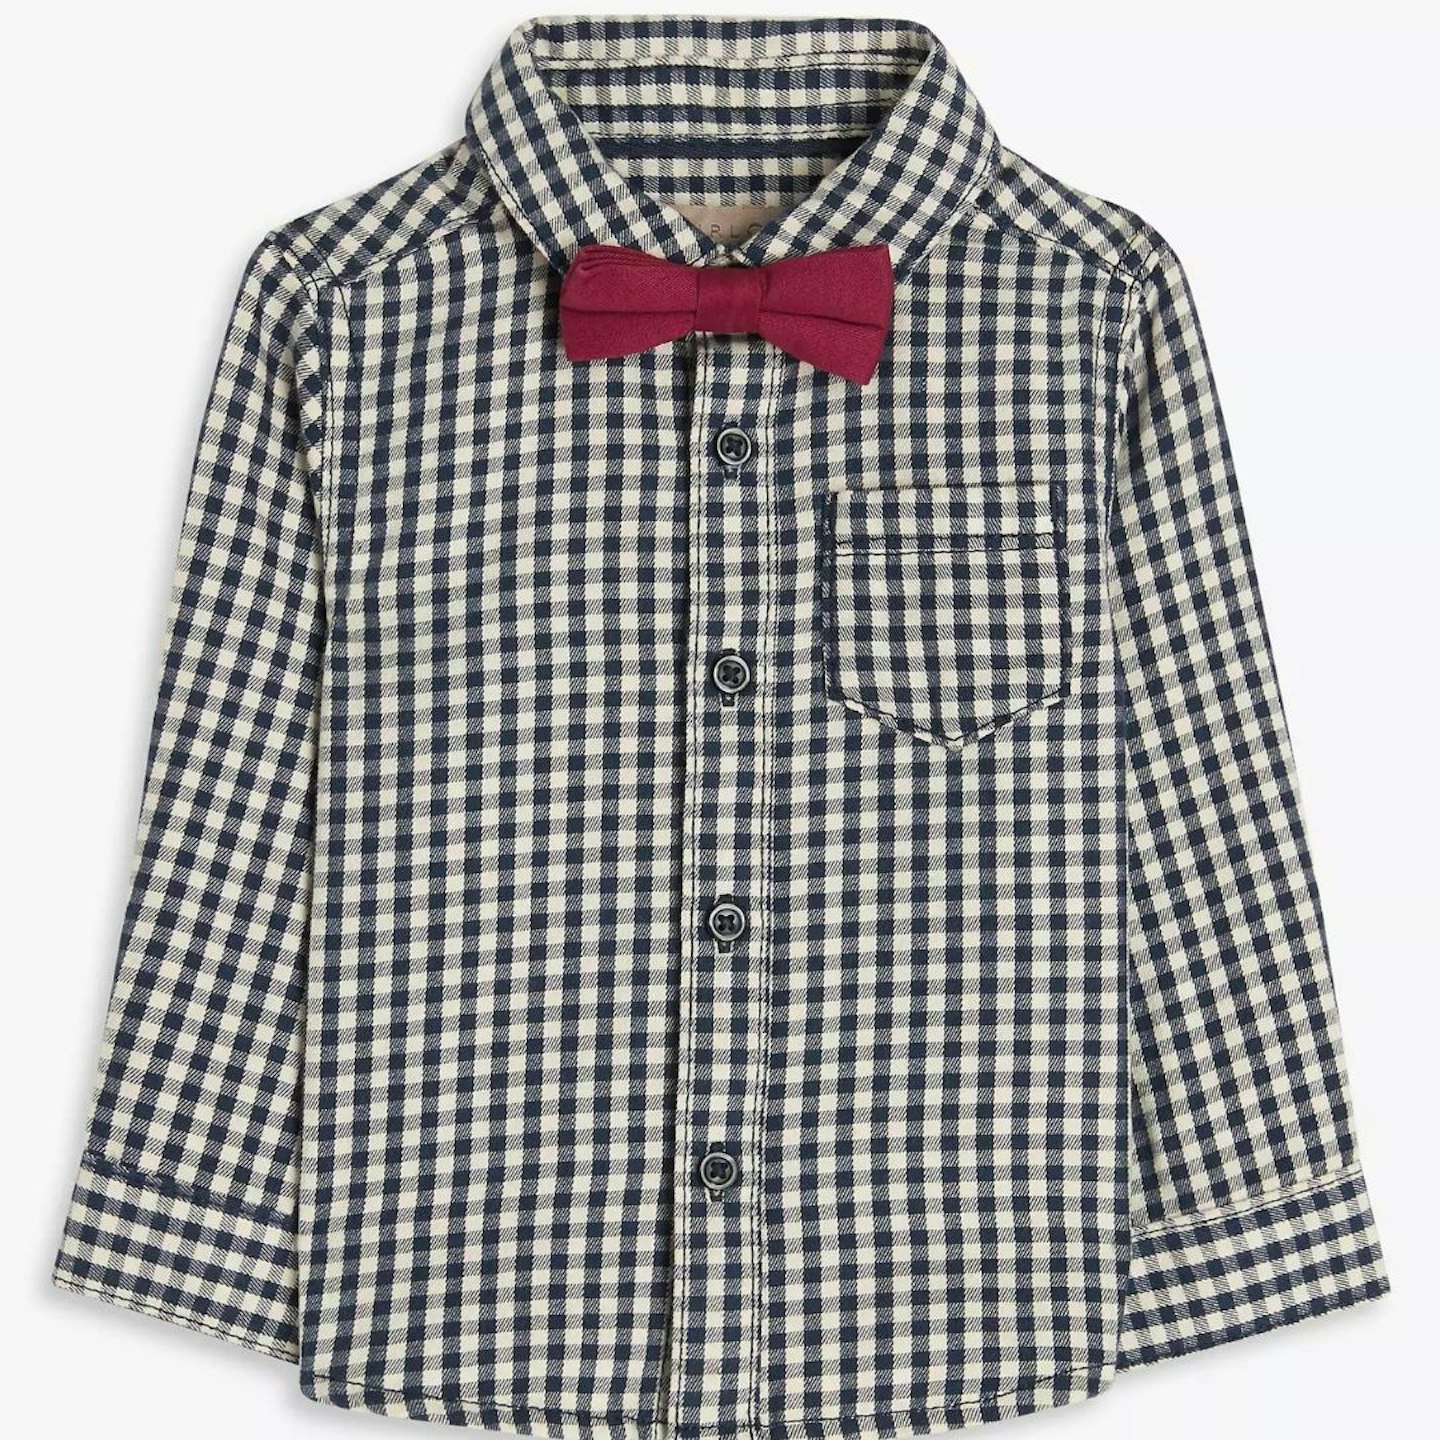 Best Christmas Day Outfits For Kids: Baby Gingham Shirt & Bow Tie Set